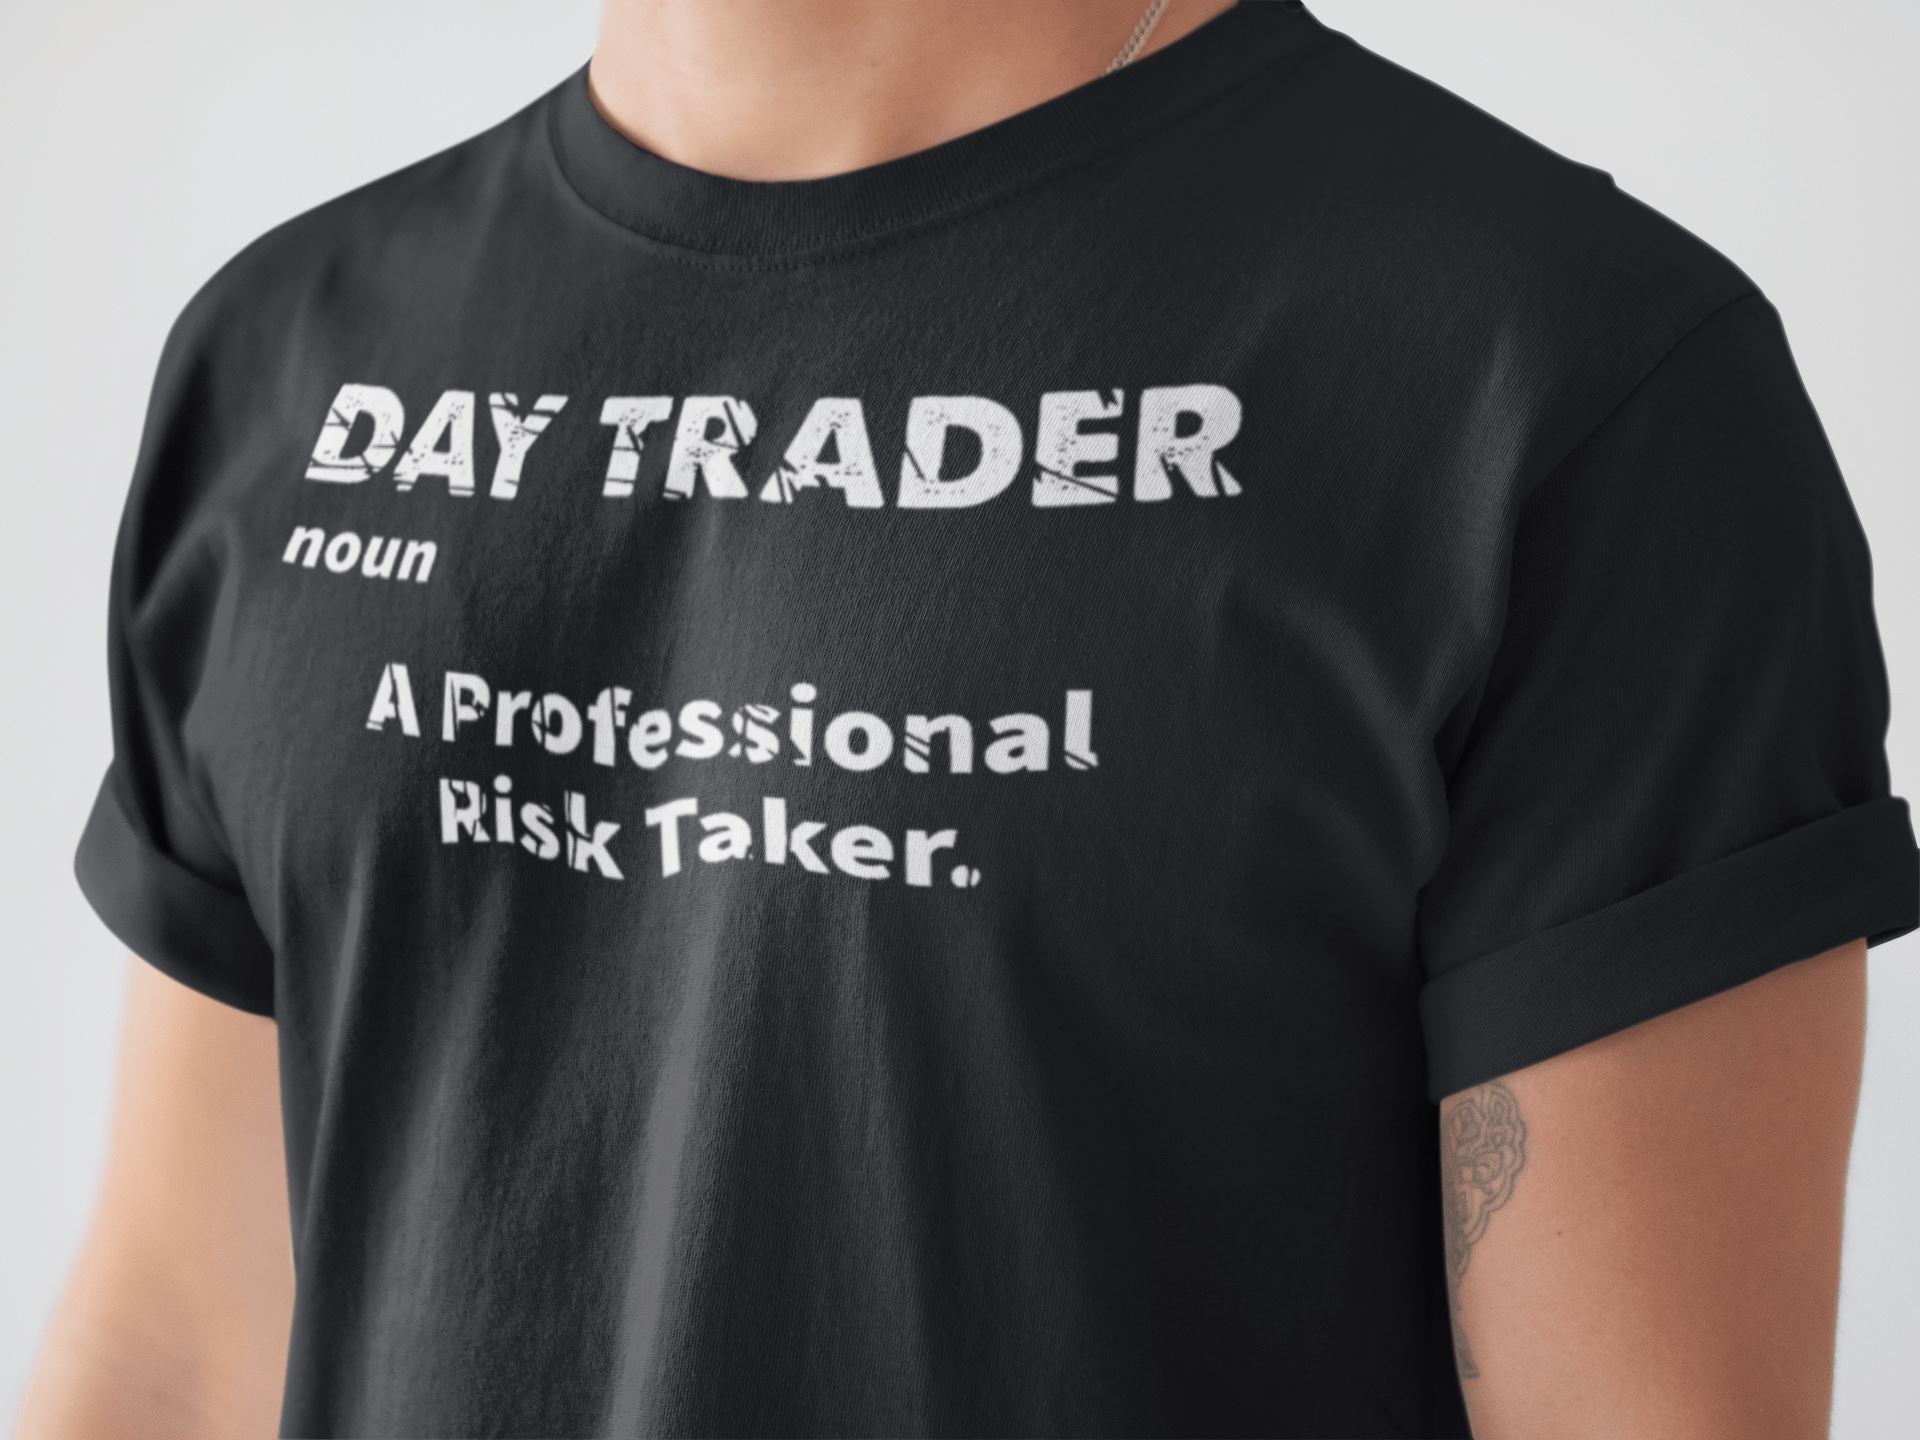 Day Trader - A Professional Risk Taker Exclusive T Shirt for Men and Women - Catch My Drift India  black, clothing, general, made in india, nifty, sensex, shirt, stock market, t shirt, trader